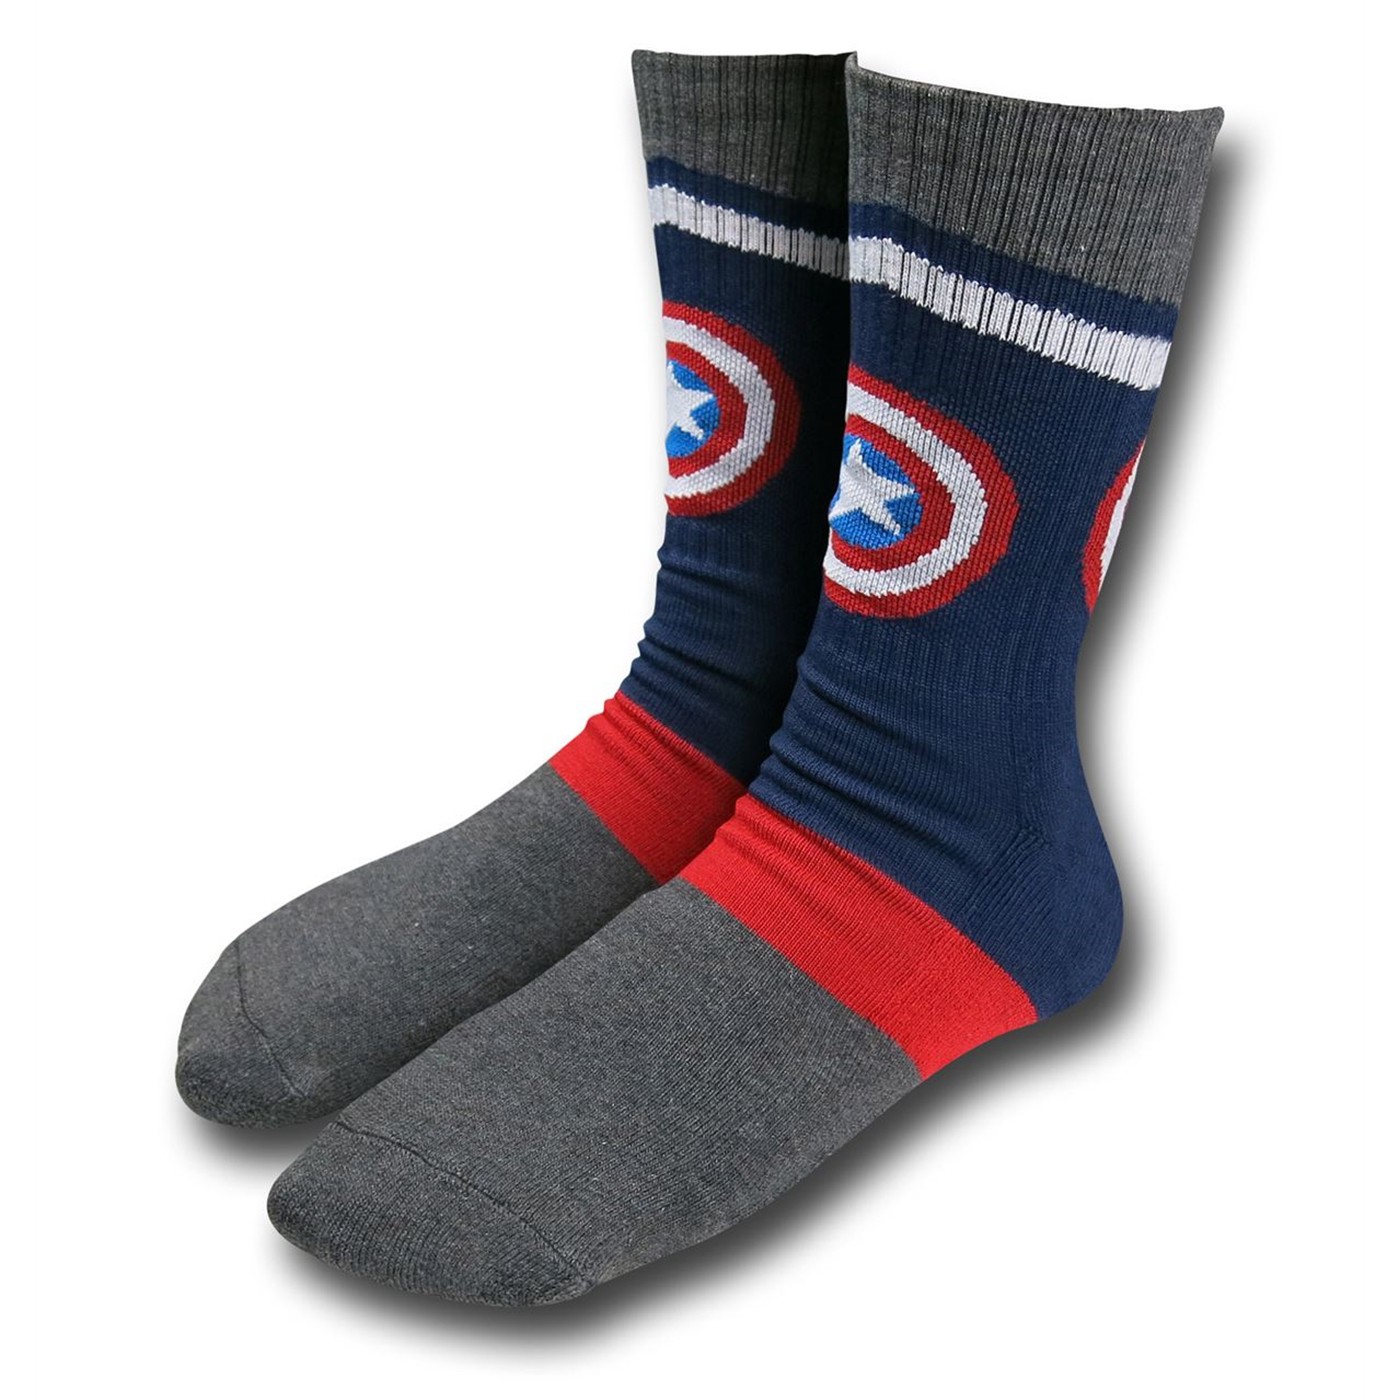 Captain America Blue and Grey Socks 2-Pack